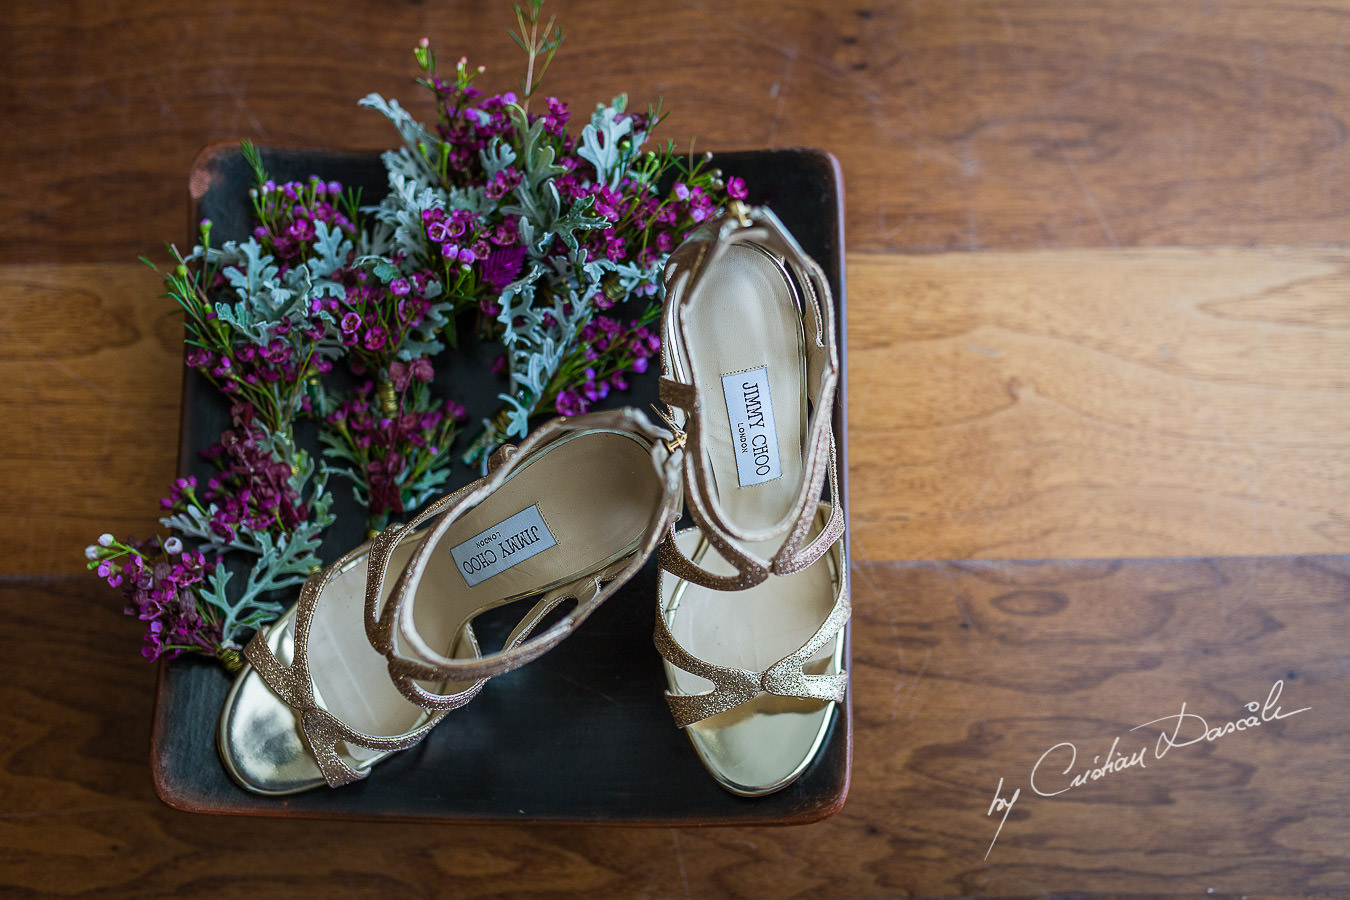 Jimmy Choo bridal shoes details, captured at a wedding in Cyprus by Photographer Cristian Dascalu.